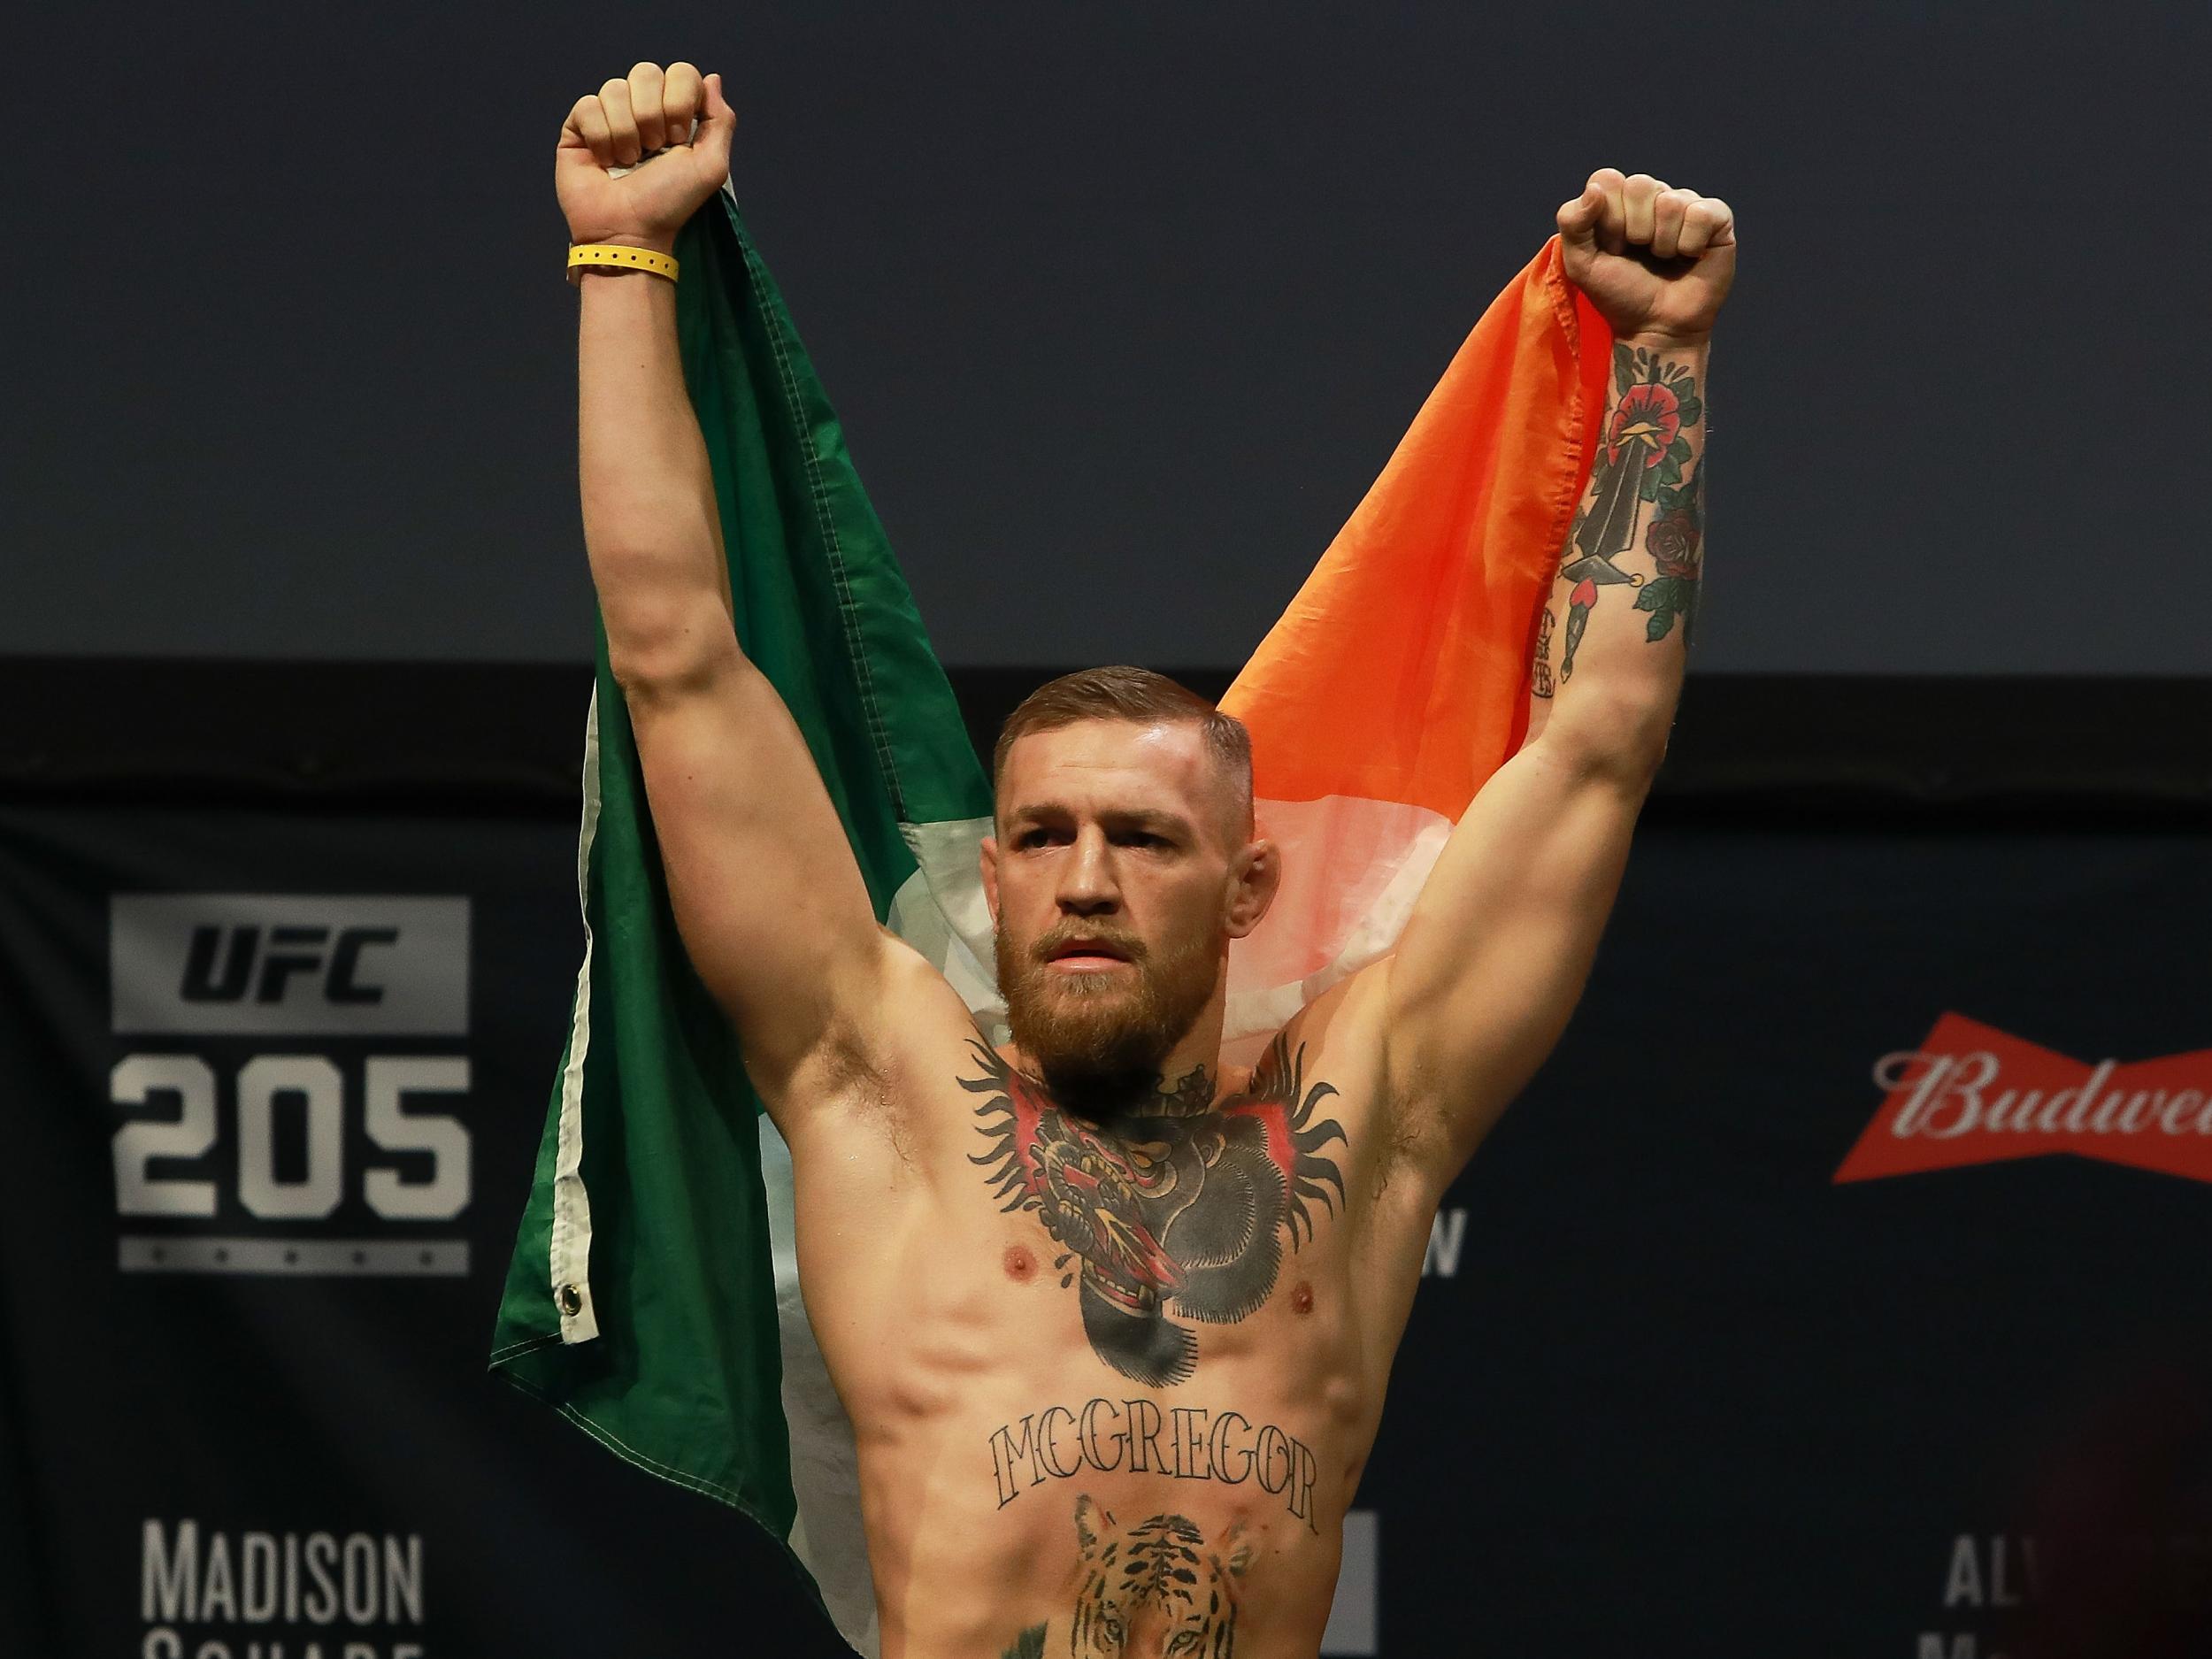 White has said McGregor believes he can win the fight